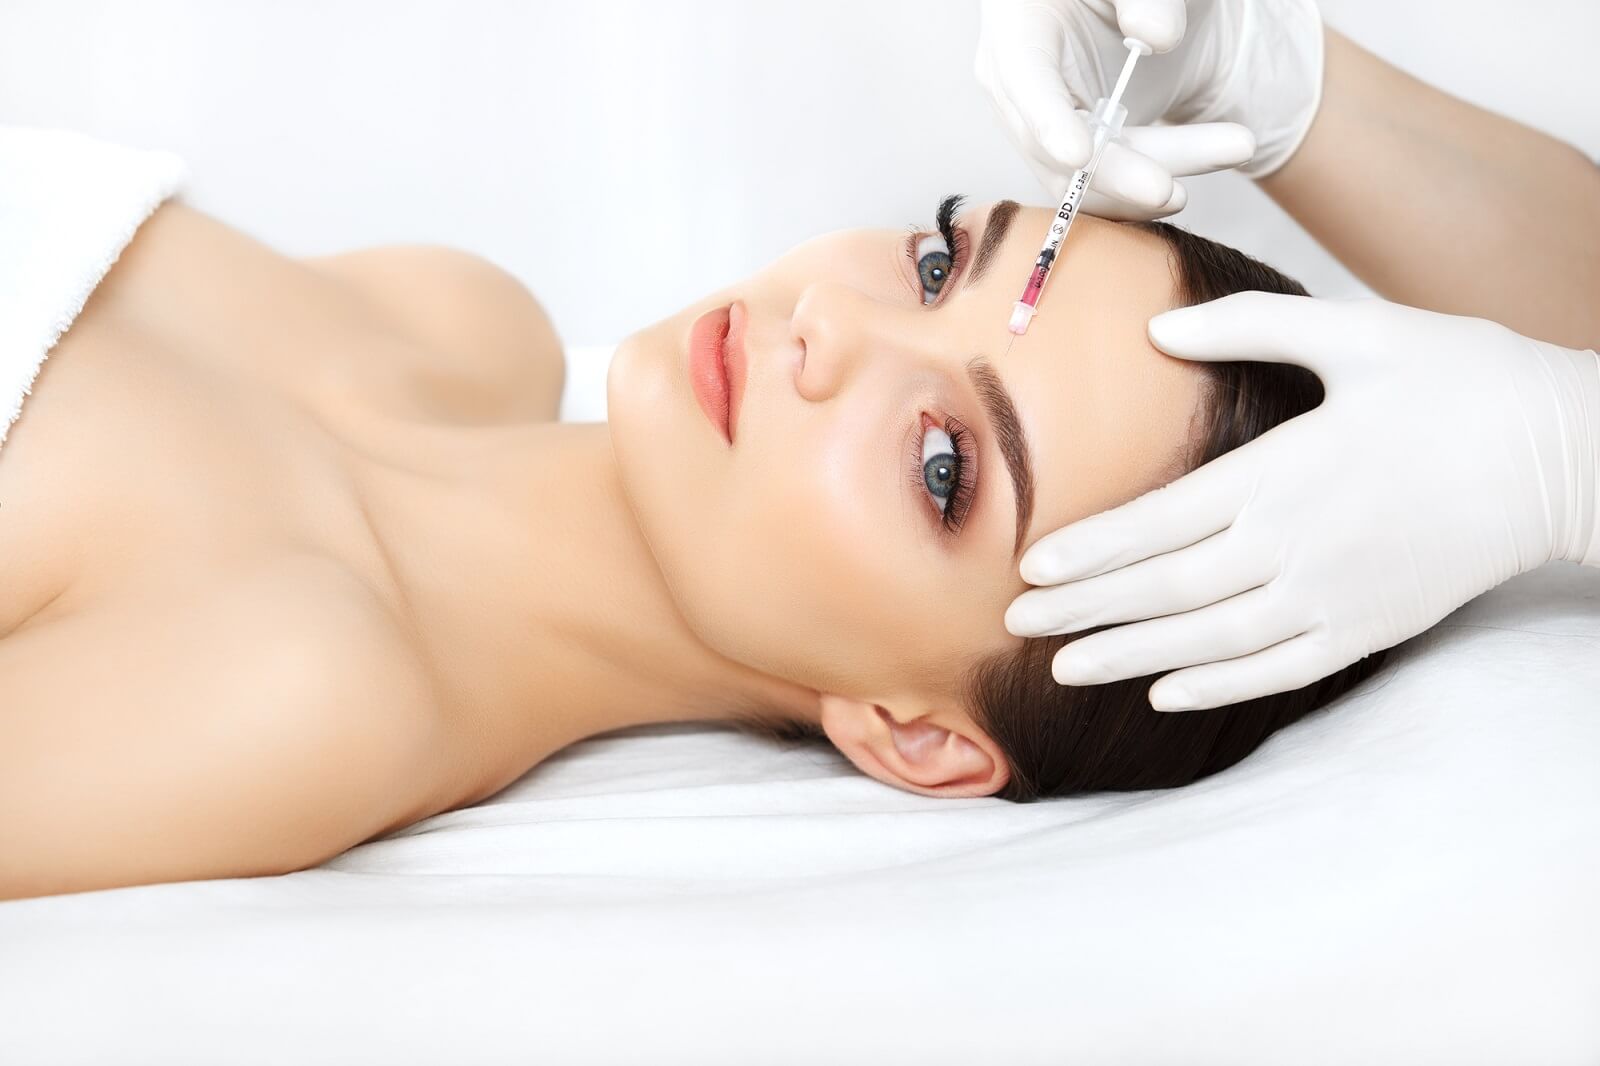 What Certification Is Needed To Inject Botox?